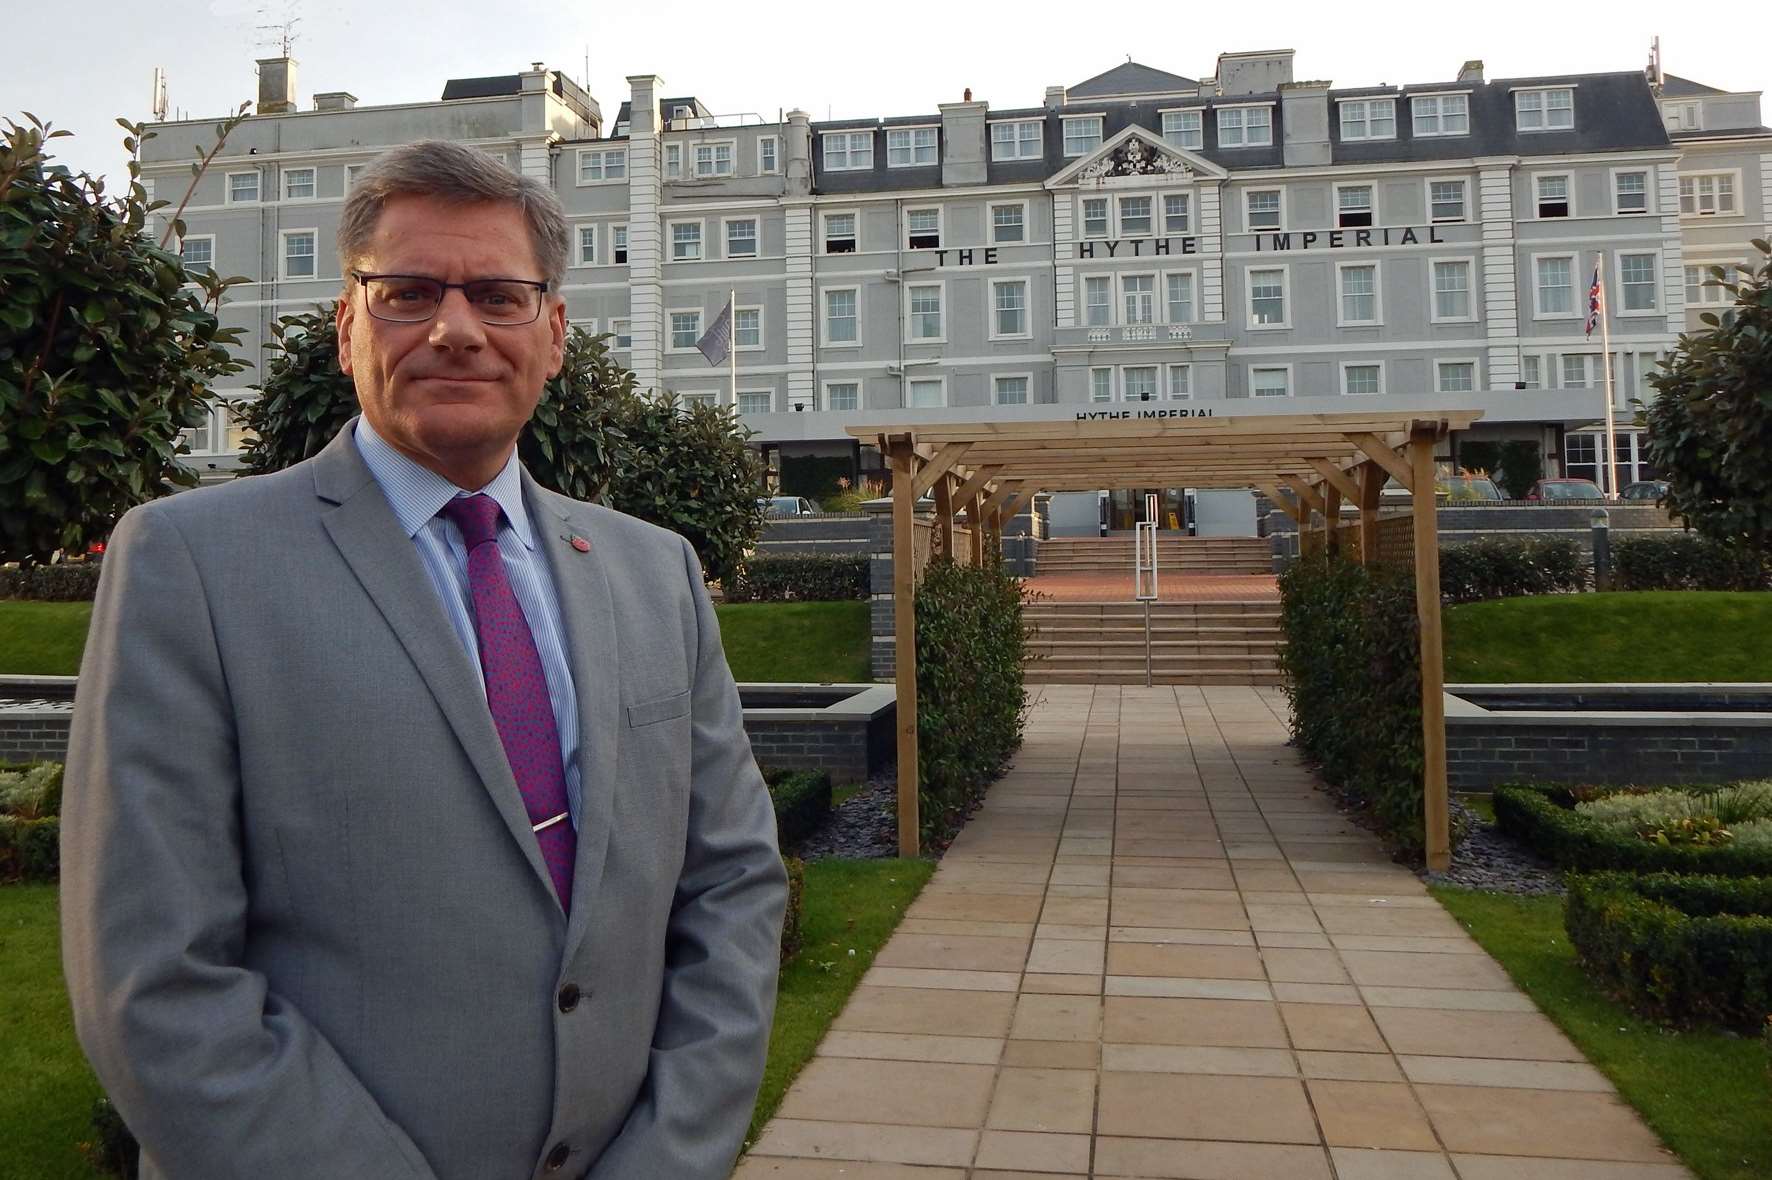 Nick Gauntlett has been hired as executive director of the Hythe Imperial Hotel